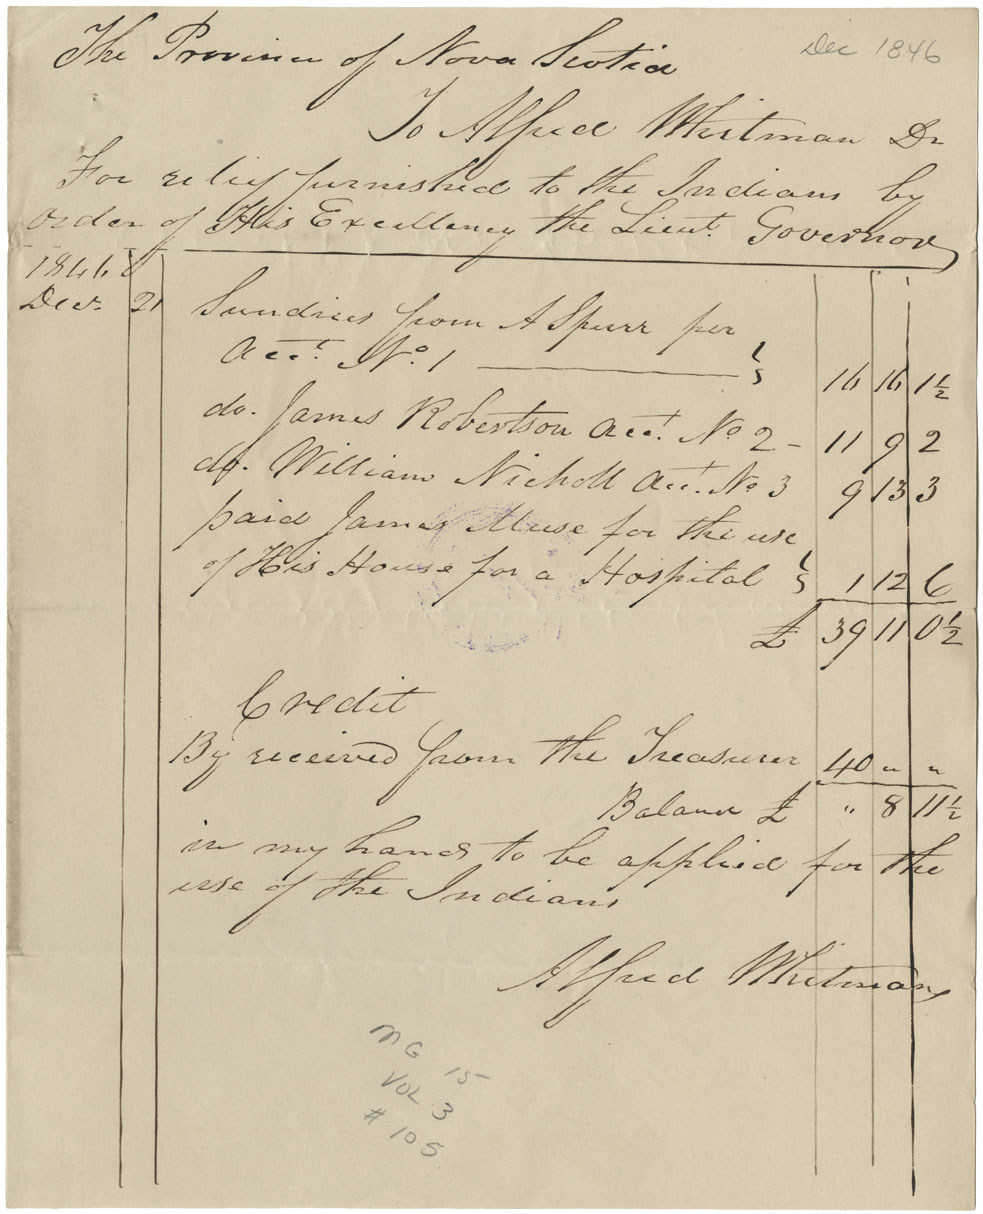 Bills and receipts of Dr. W.L. Bent for supplies for sick Bear River Mi'kmaq and list of supplies to individual Mi'kmaq bought by Alfred Whitman, with a letter from him to the Lieutenant-Governor thanking him for the donation. 